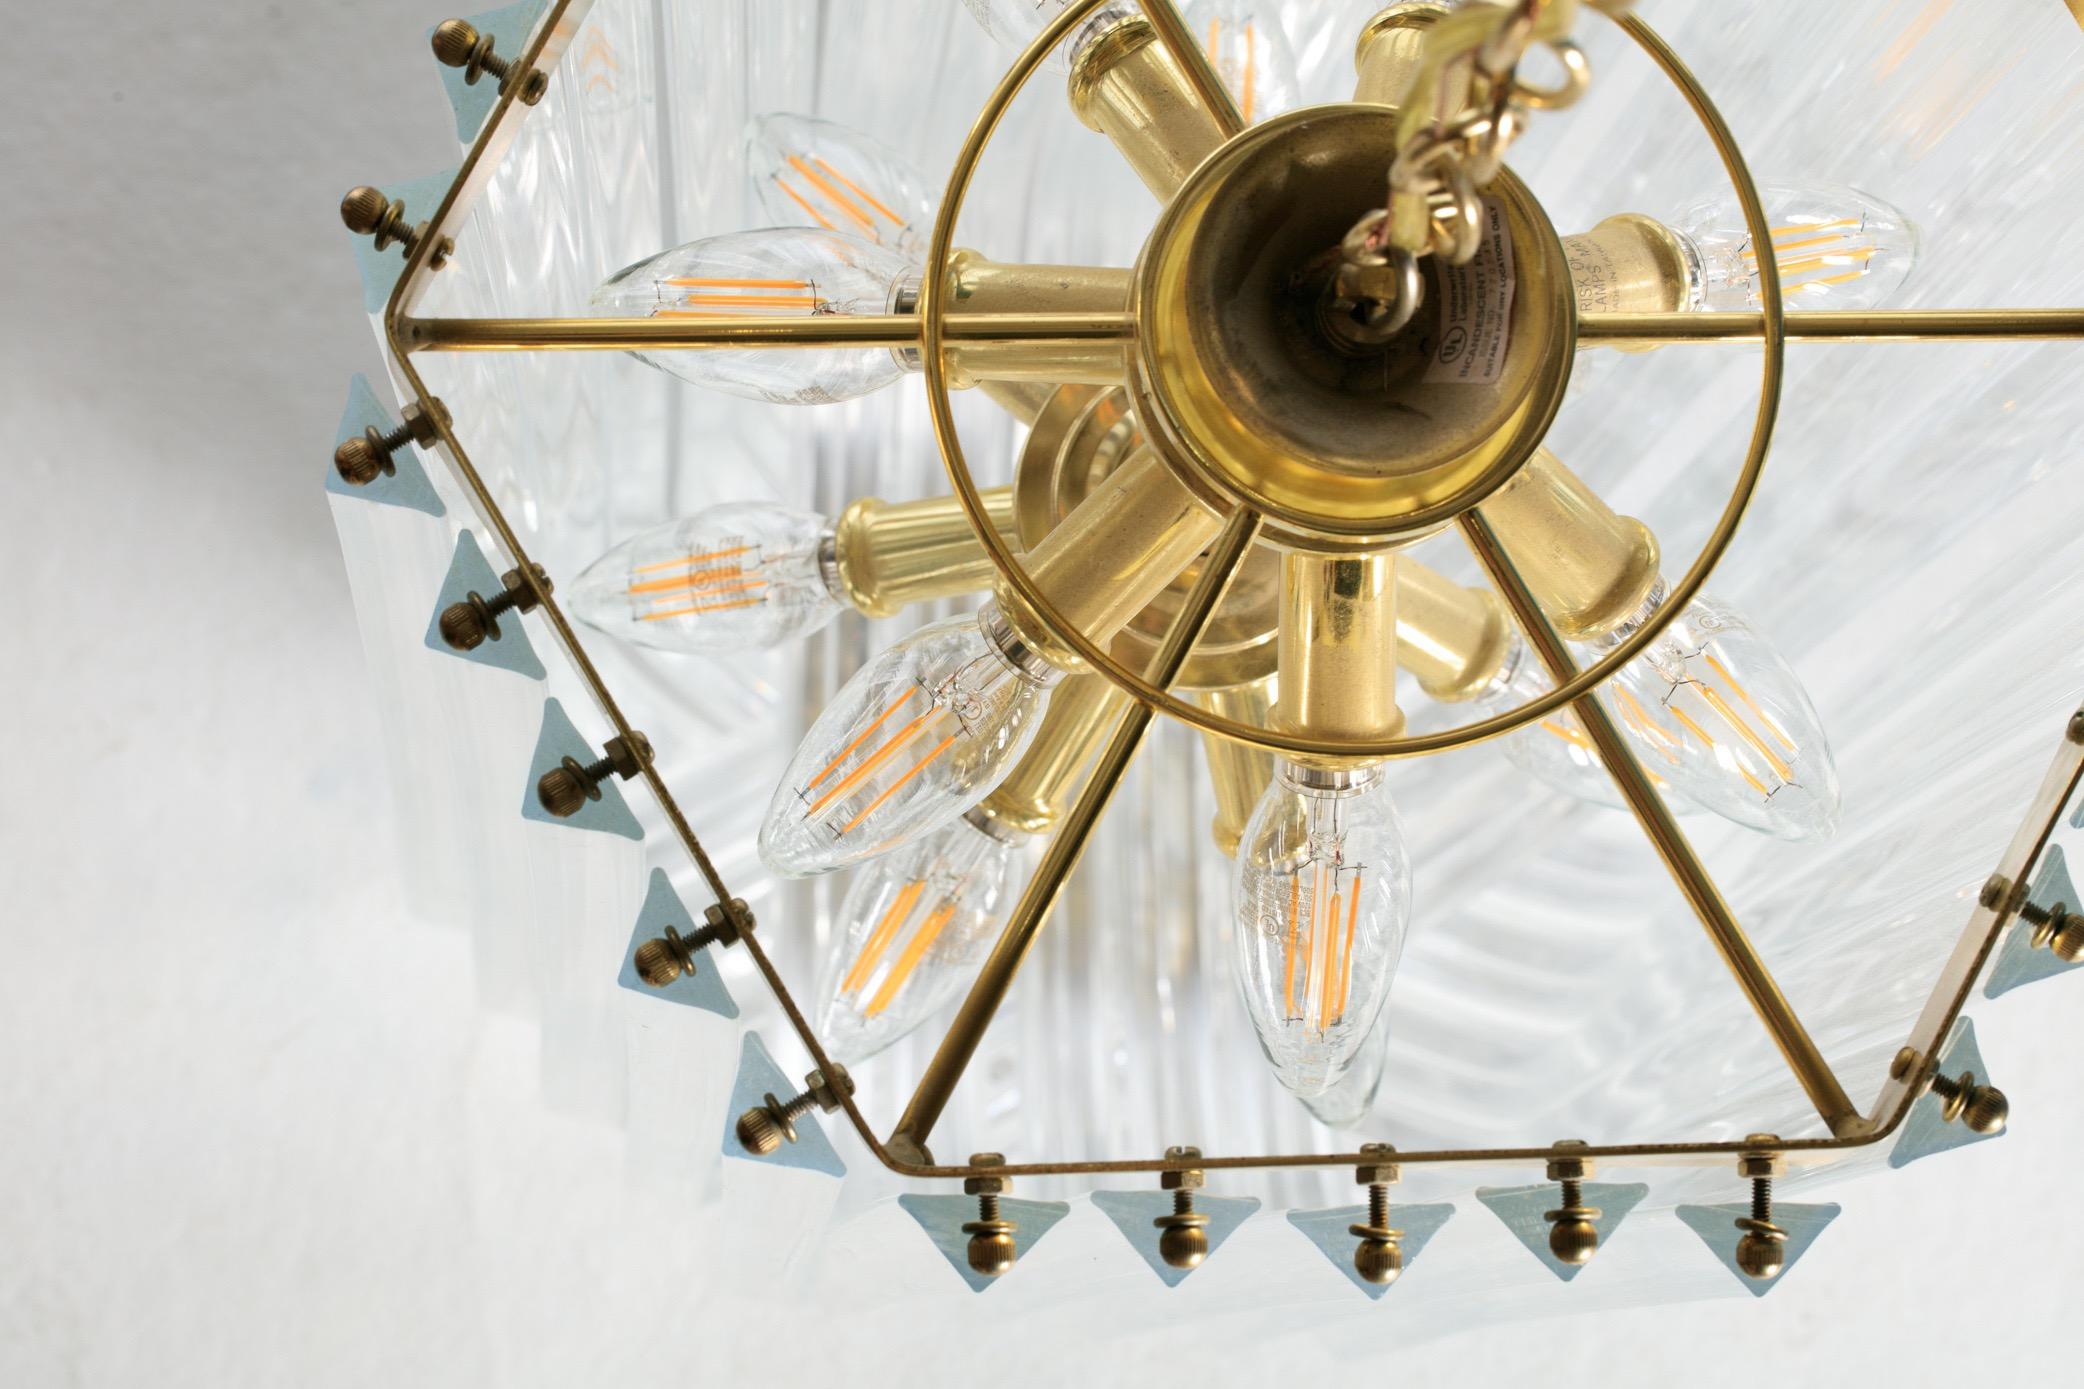 Extra Large Sculptural Lucite and Brass Chandelier, circa 1970s For Sale 6